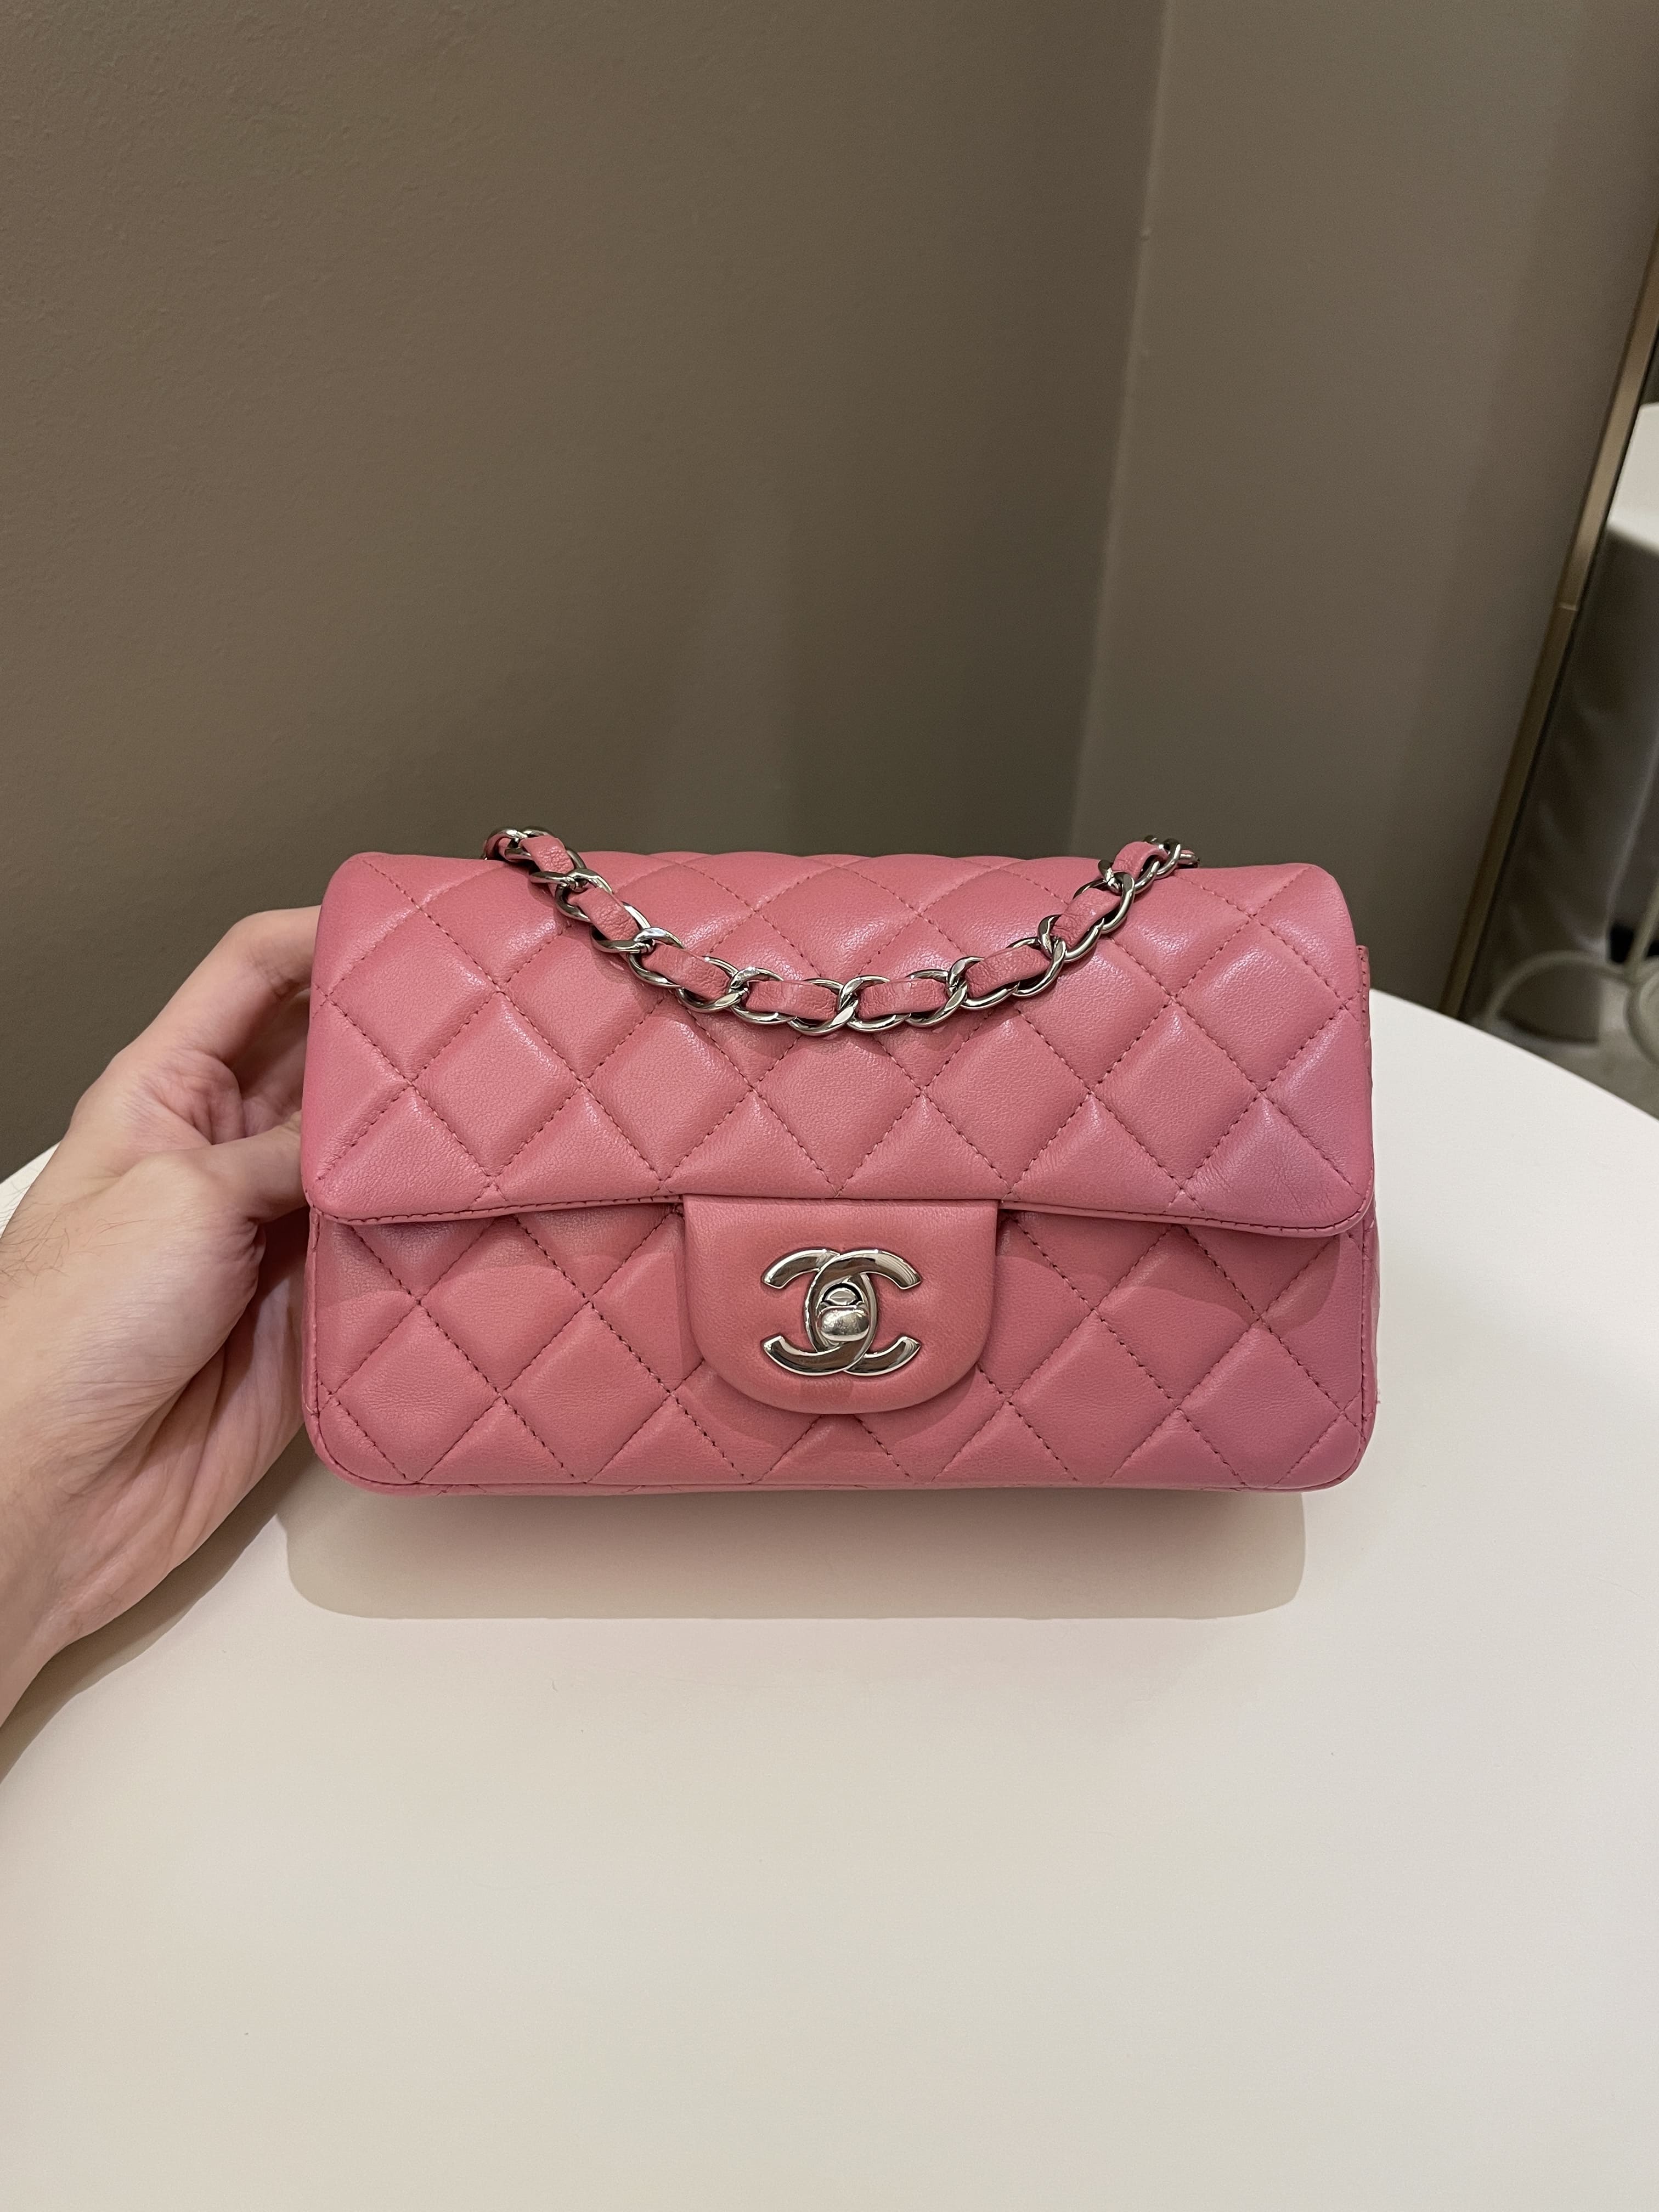 Chanel Lambskin Quilted Mini Rectangular Flap Pink